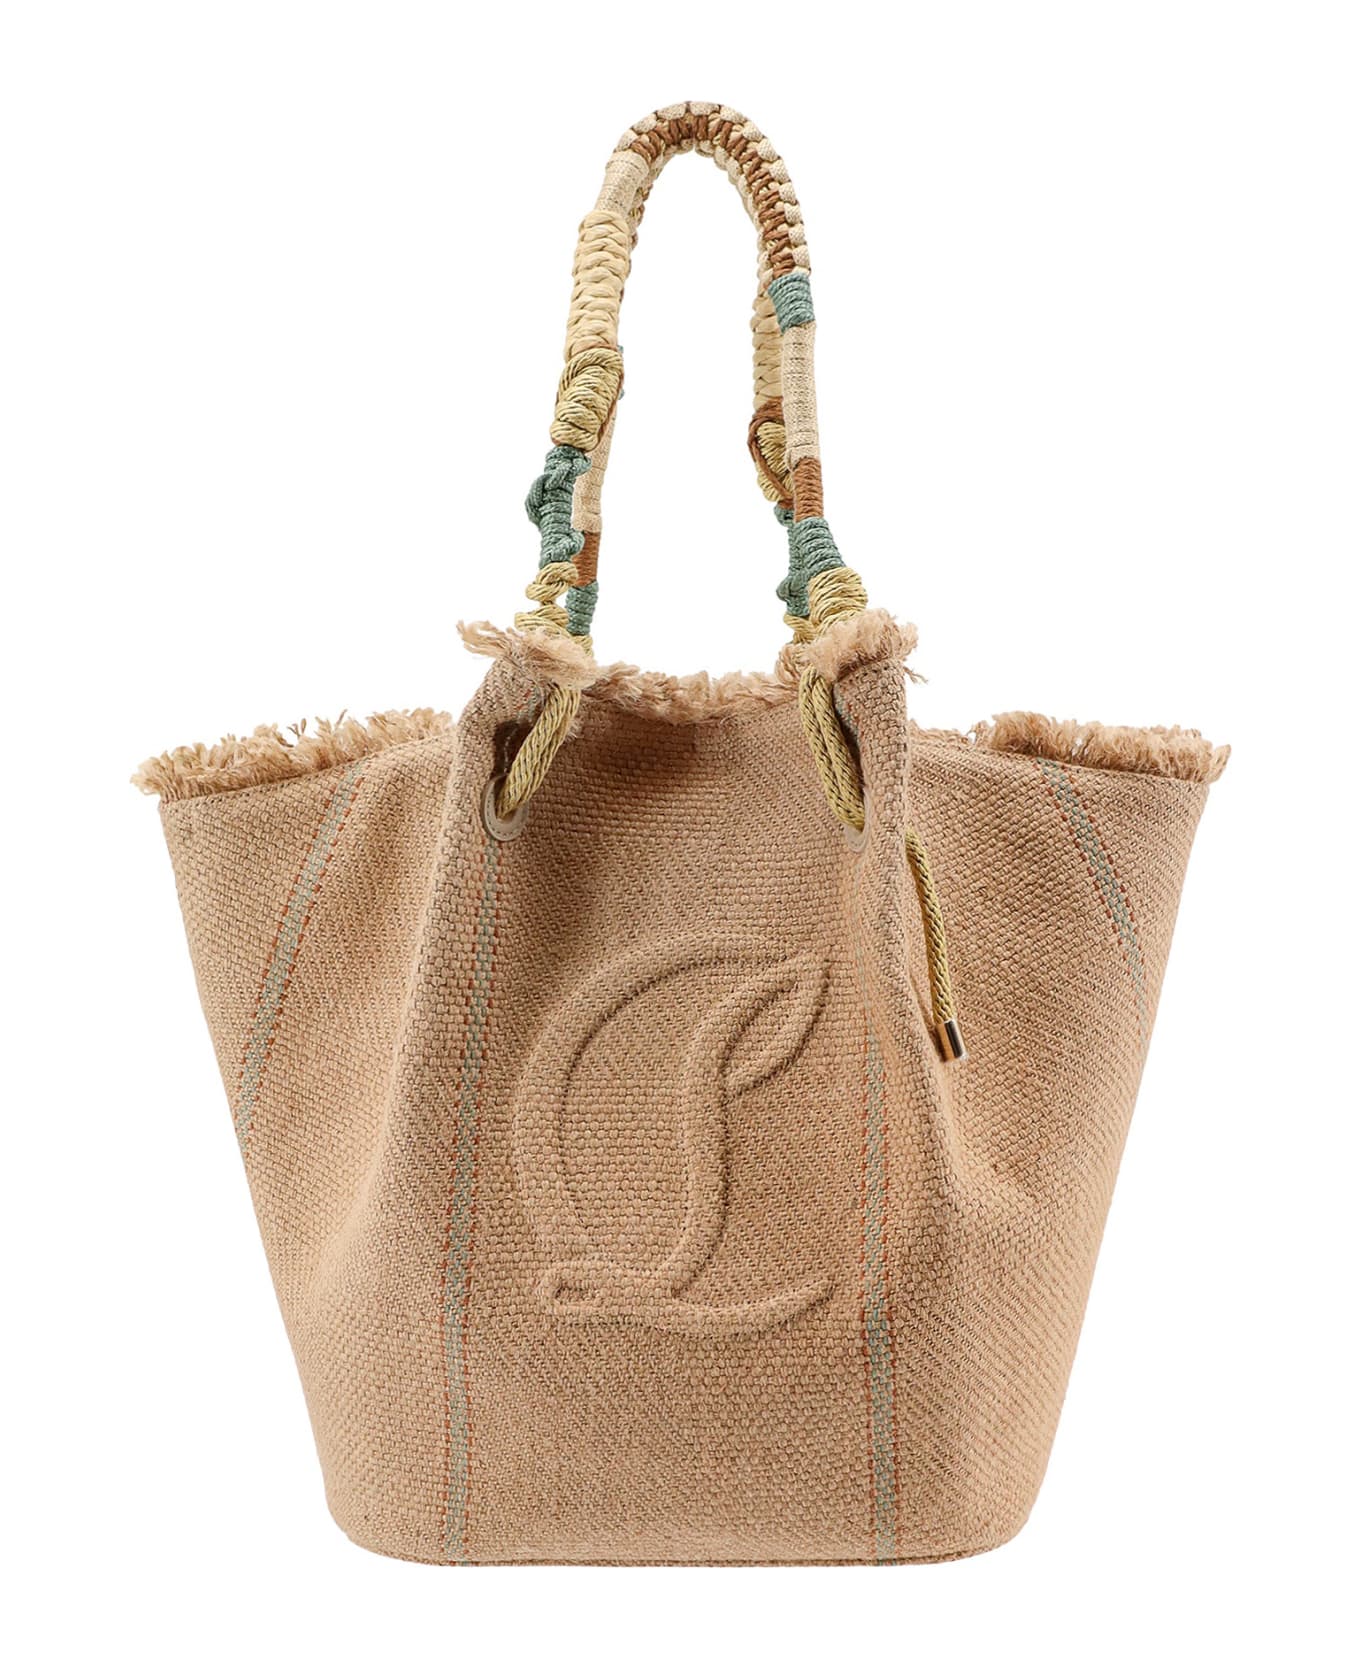 Christian Louboutin By My Side Top Handle Bag - Beige